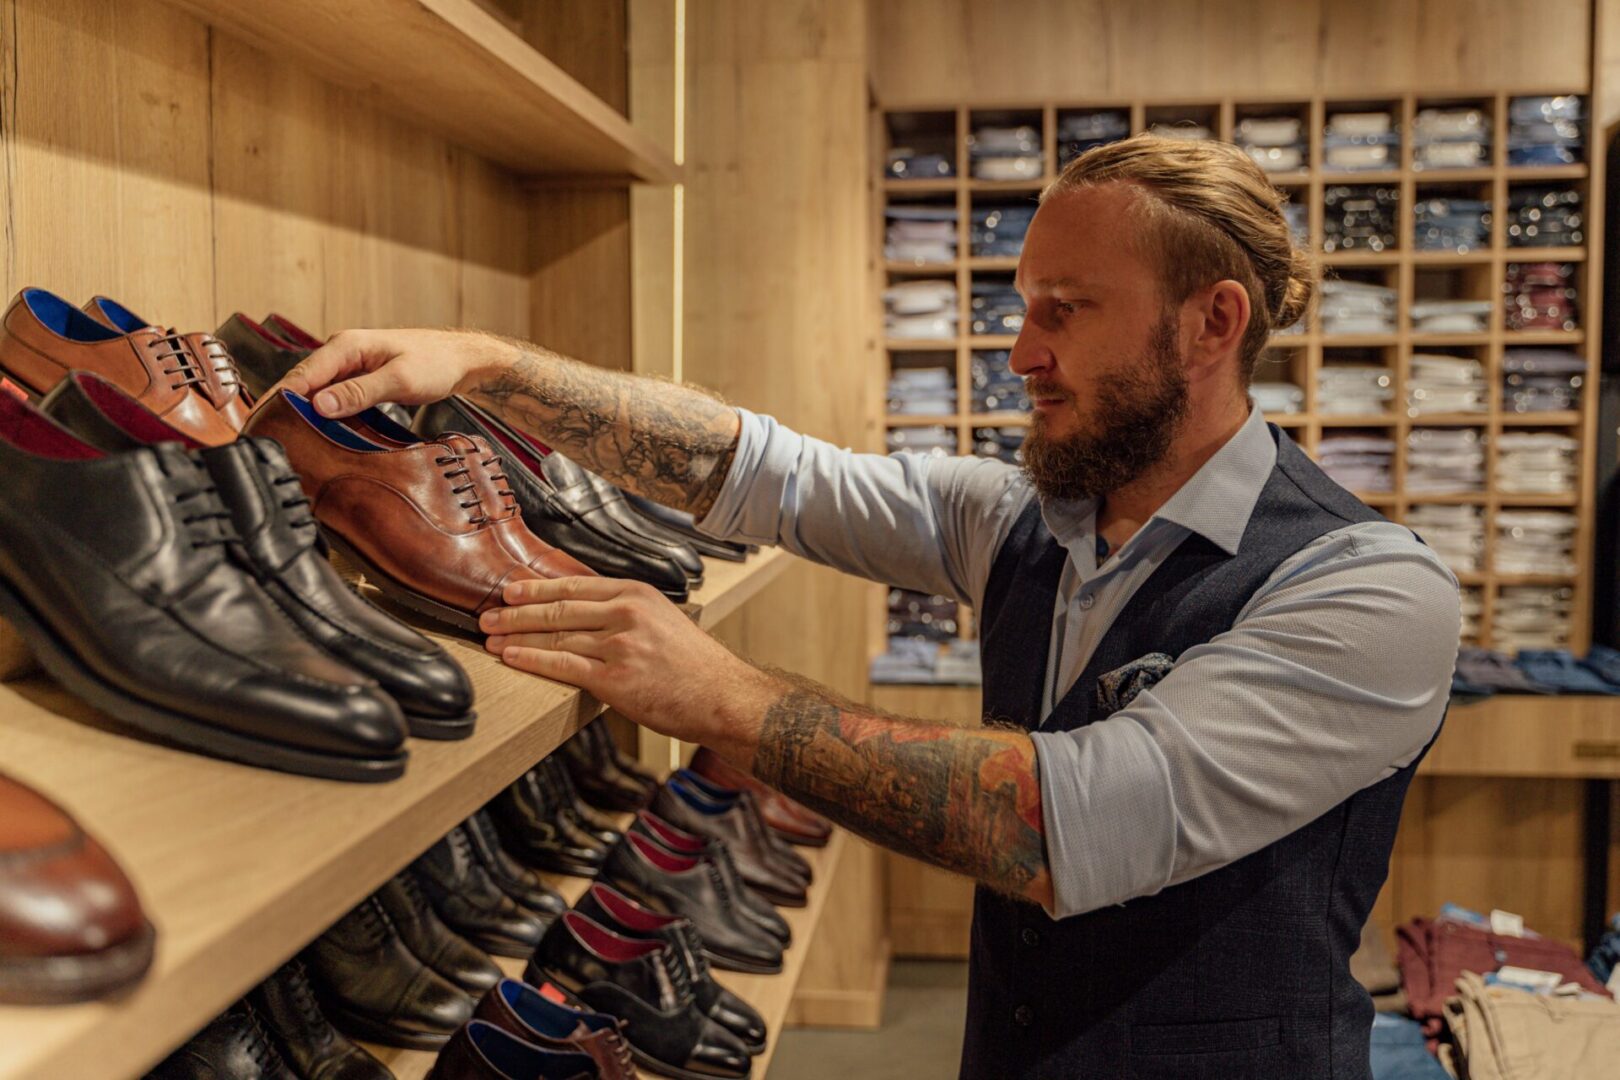 A man looking at shoes in a store.